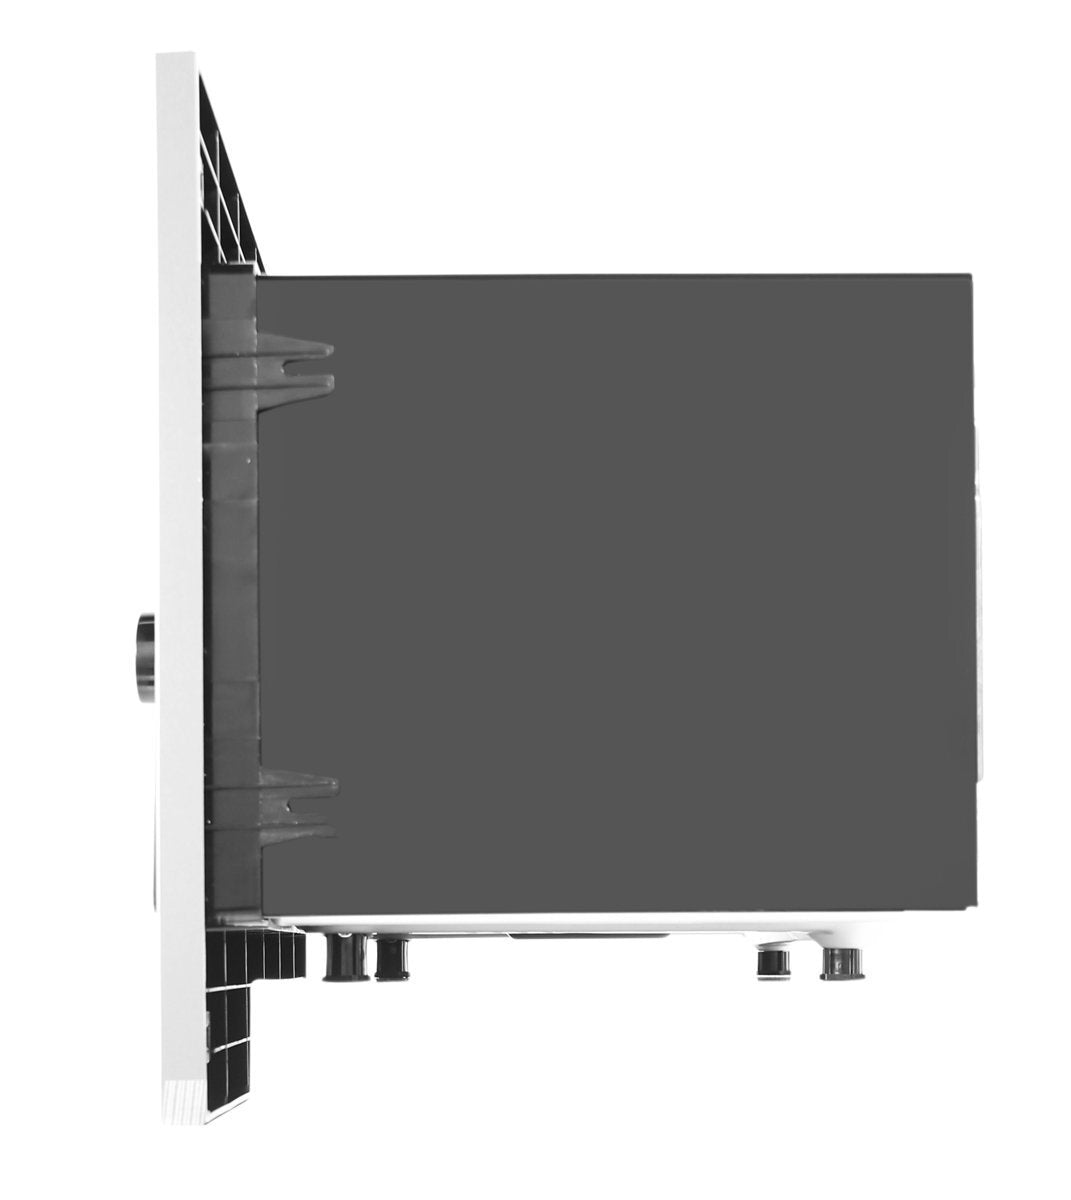 28c815b3f97967bbcbd93745f8bd96d60e88663d_Westinghouse_WMB2802SA_28L_Built_in_Microwave_Oven_900W_Side_high-high